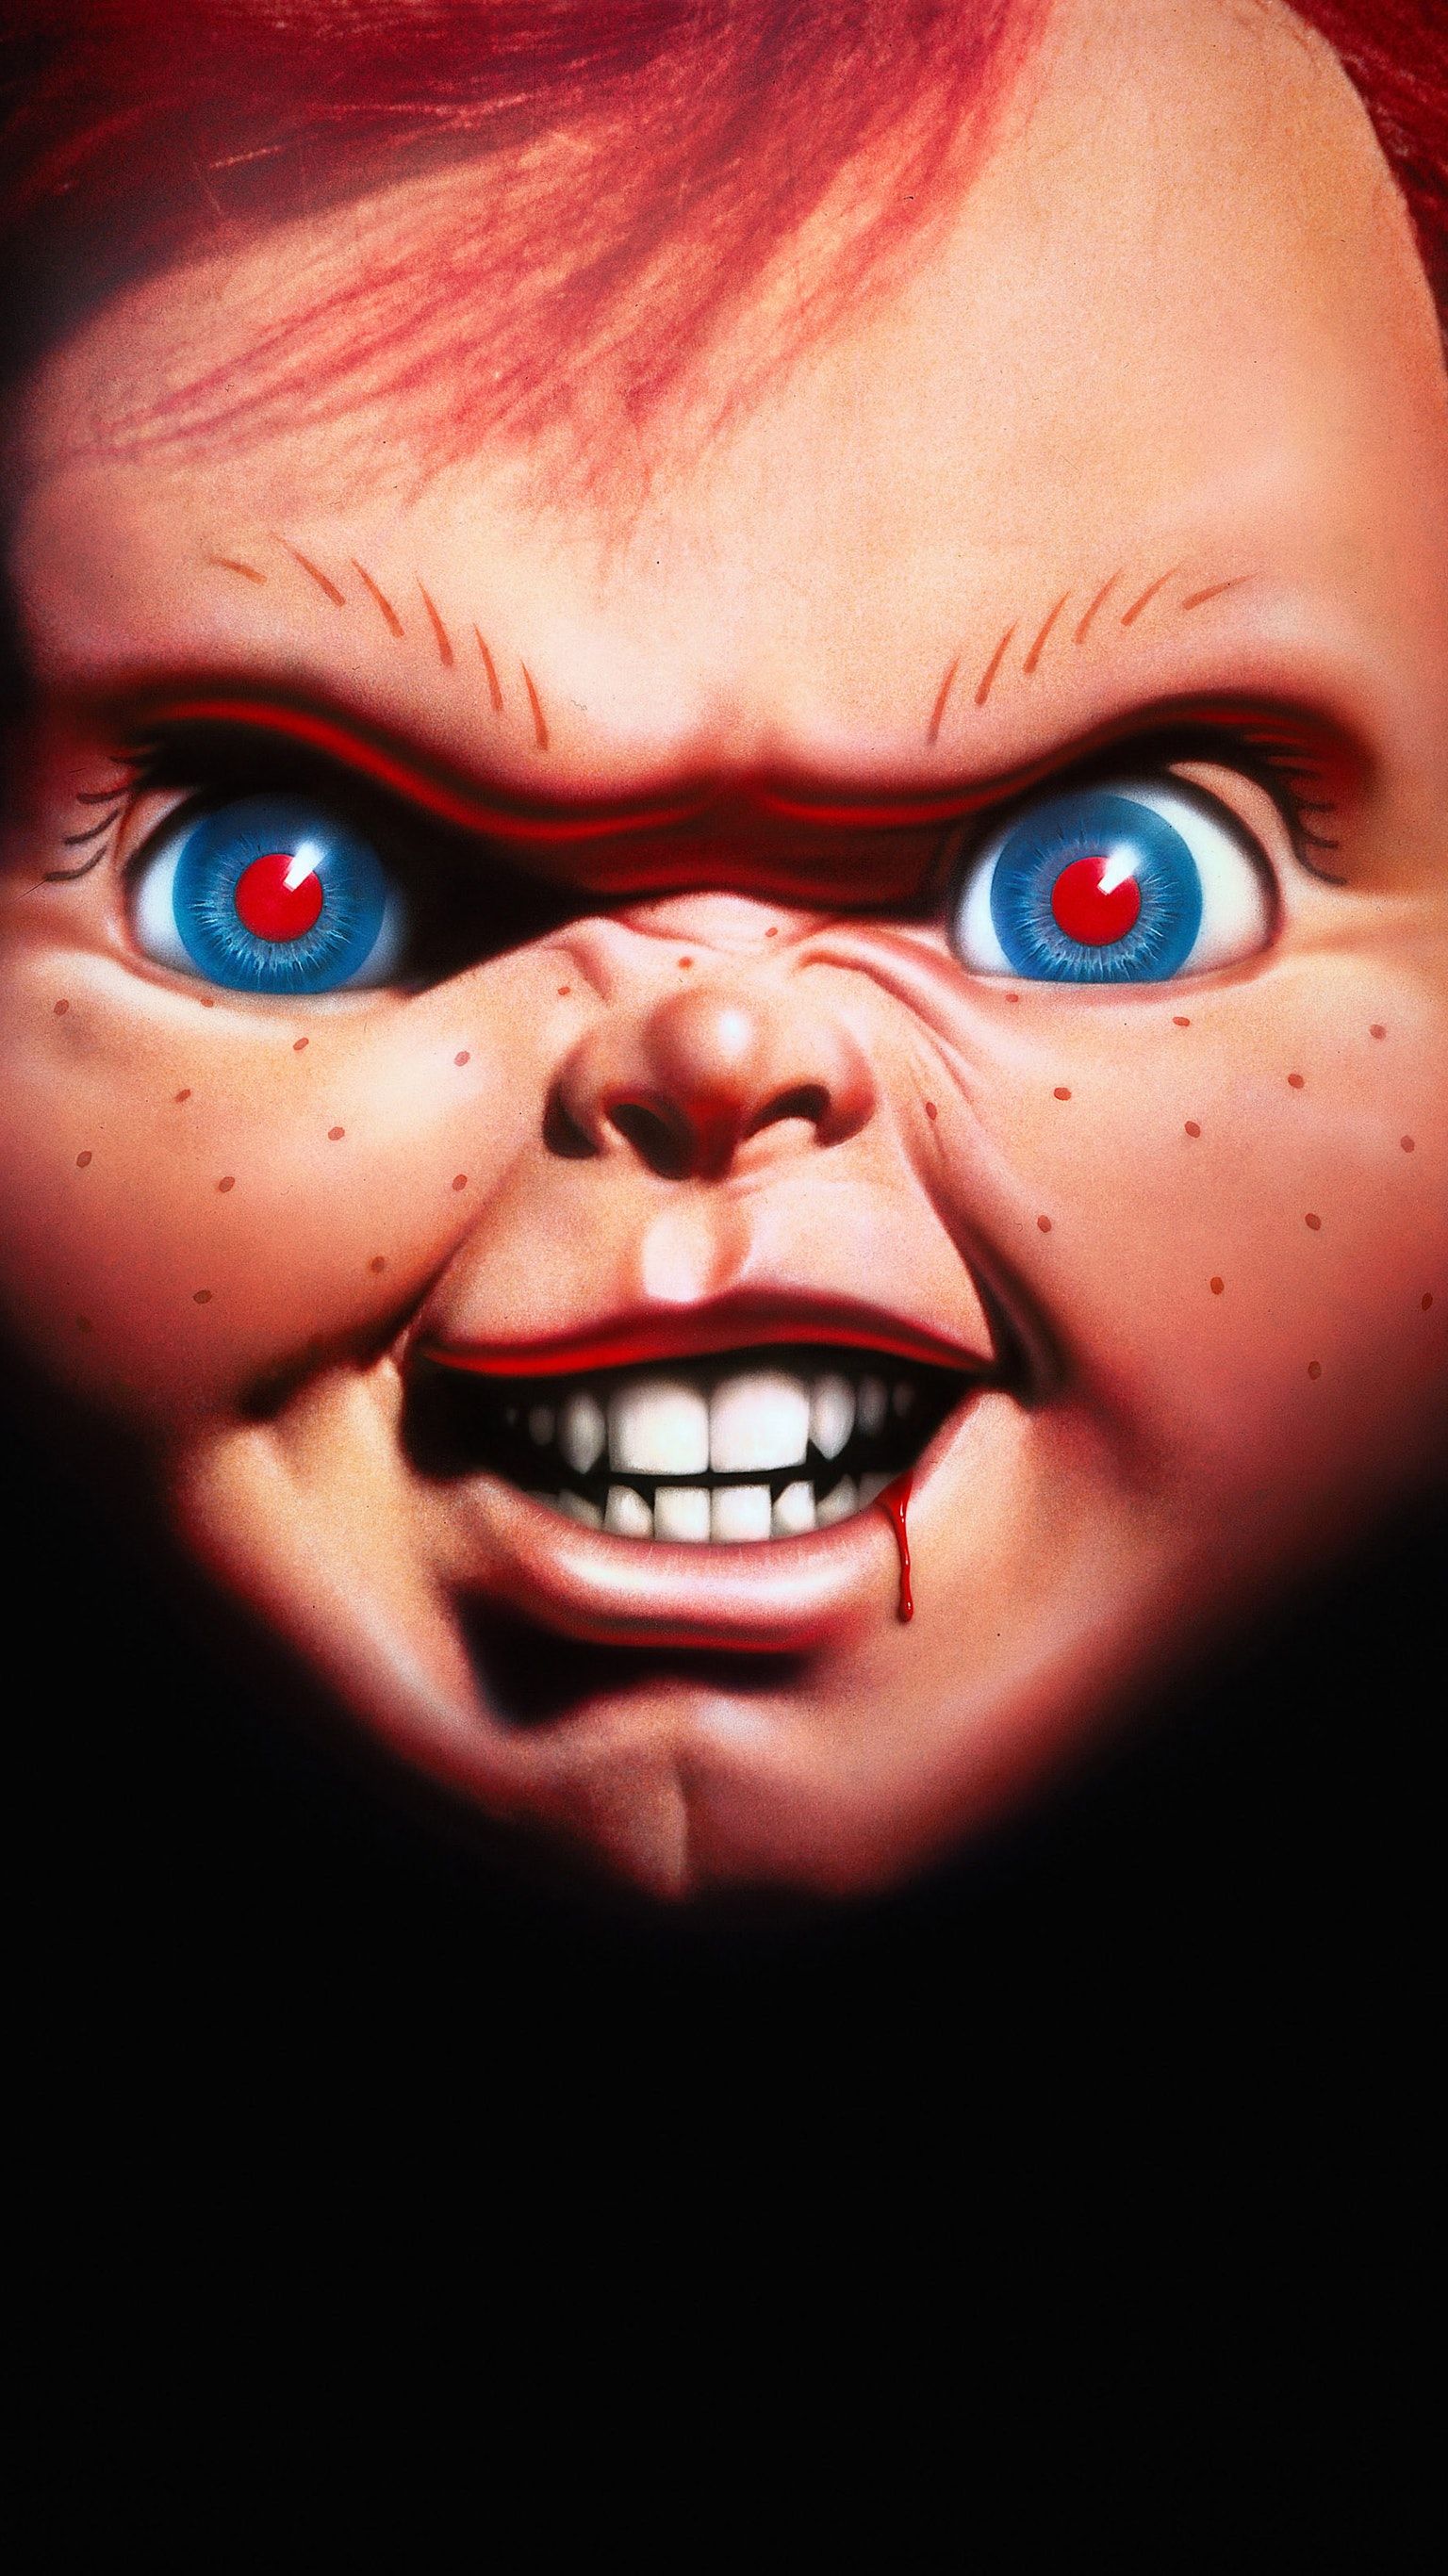 Child S Play Phone Wallpaper In I Love These